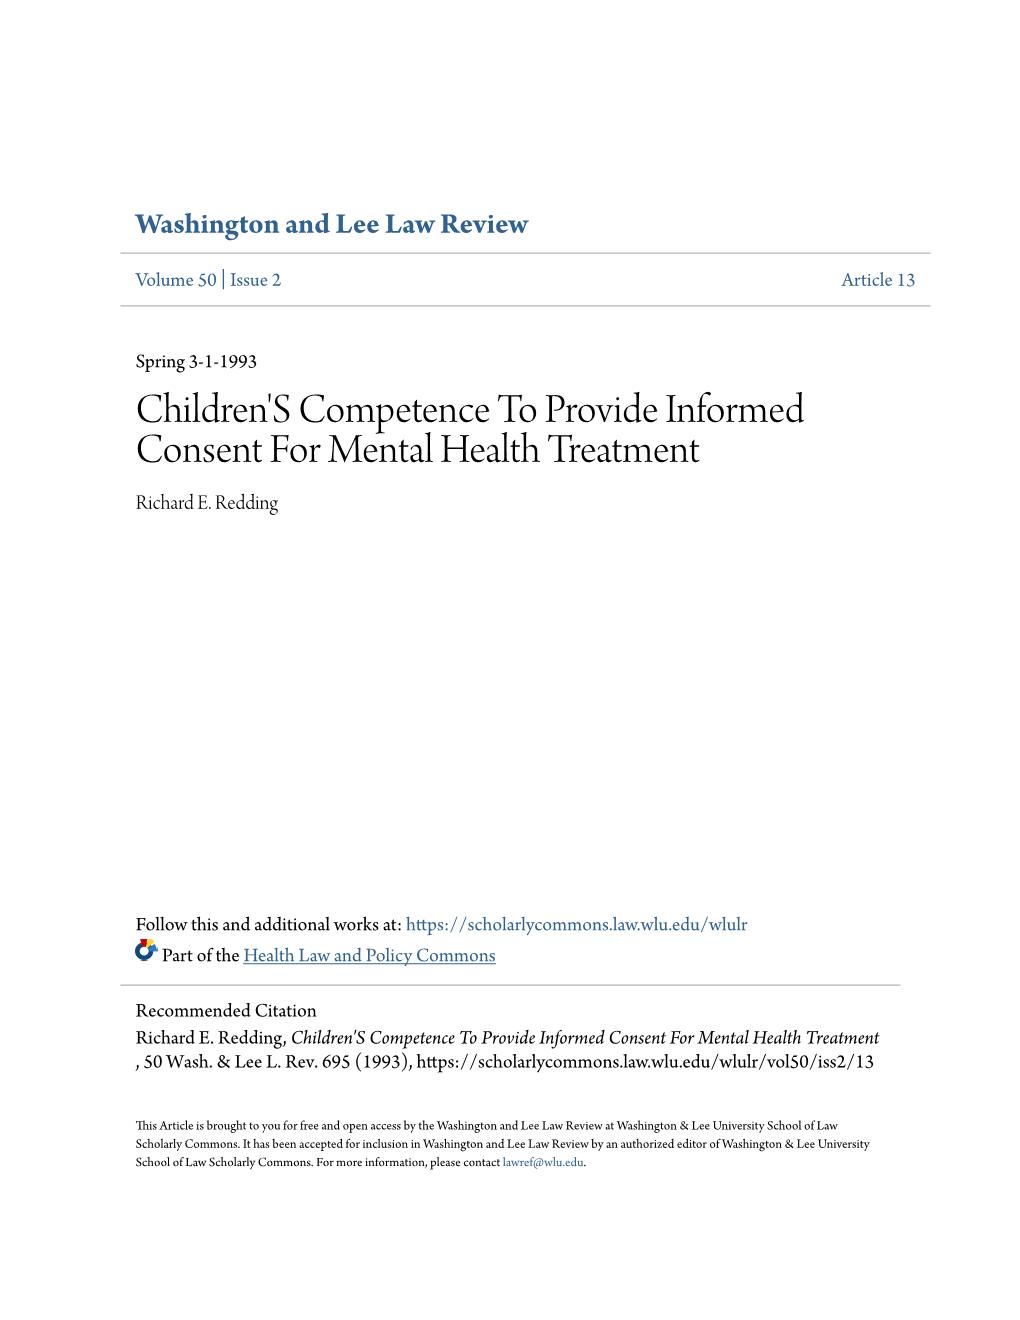 Children's Competence to Provide Informed Consent for Mental Health Treatment Richard E